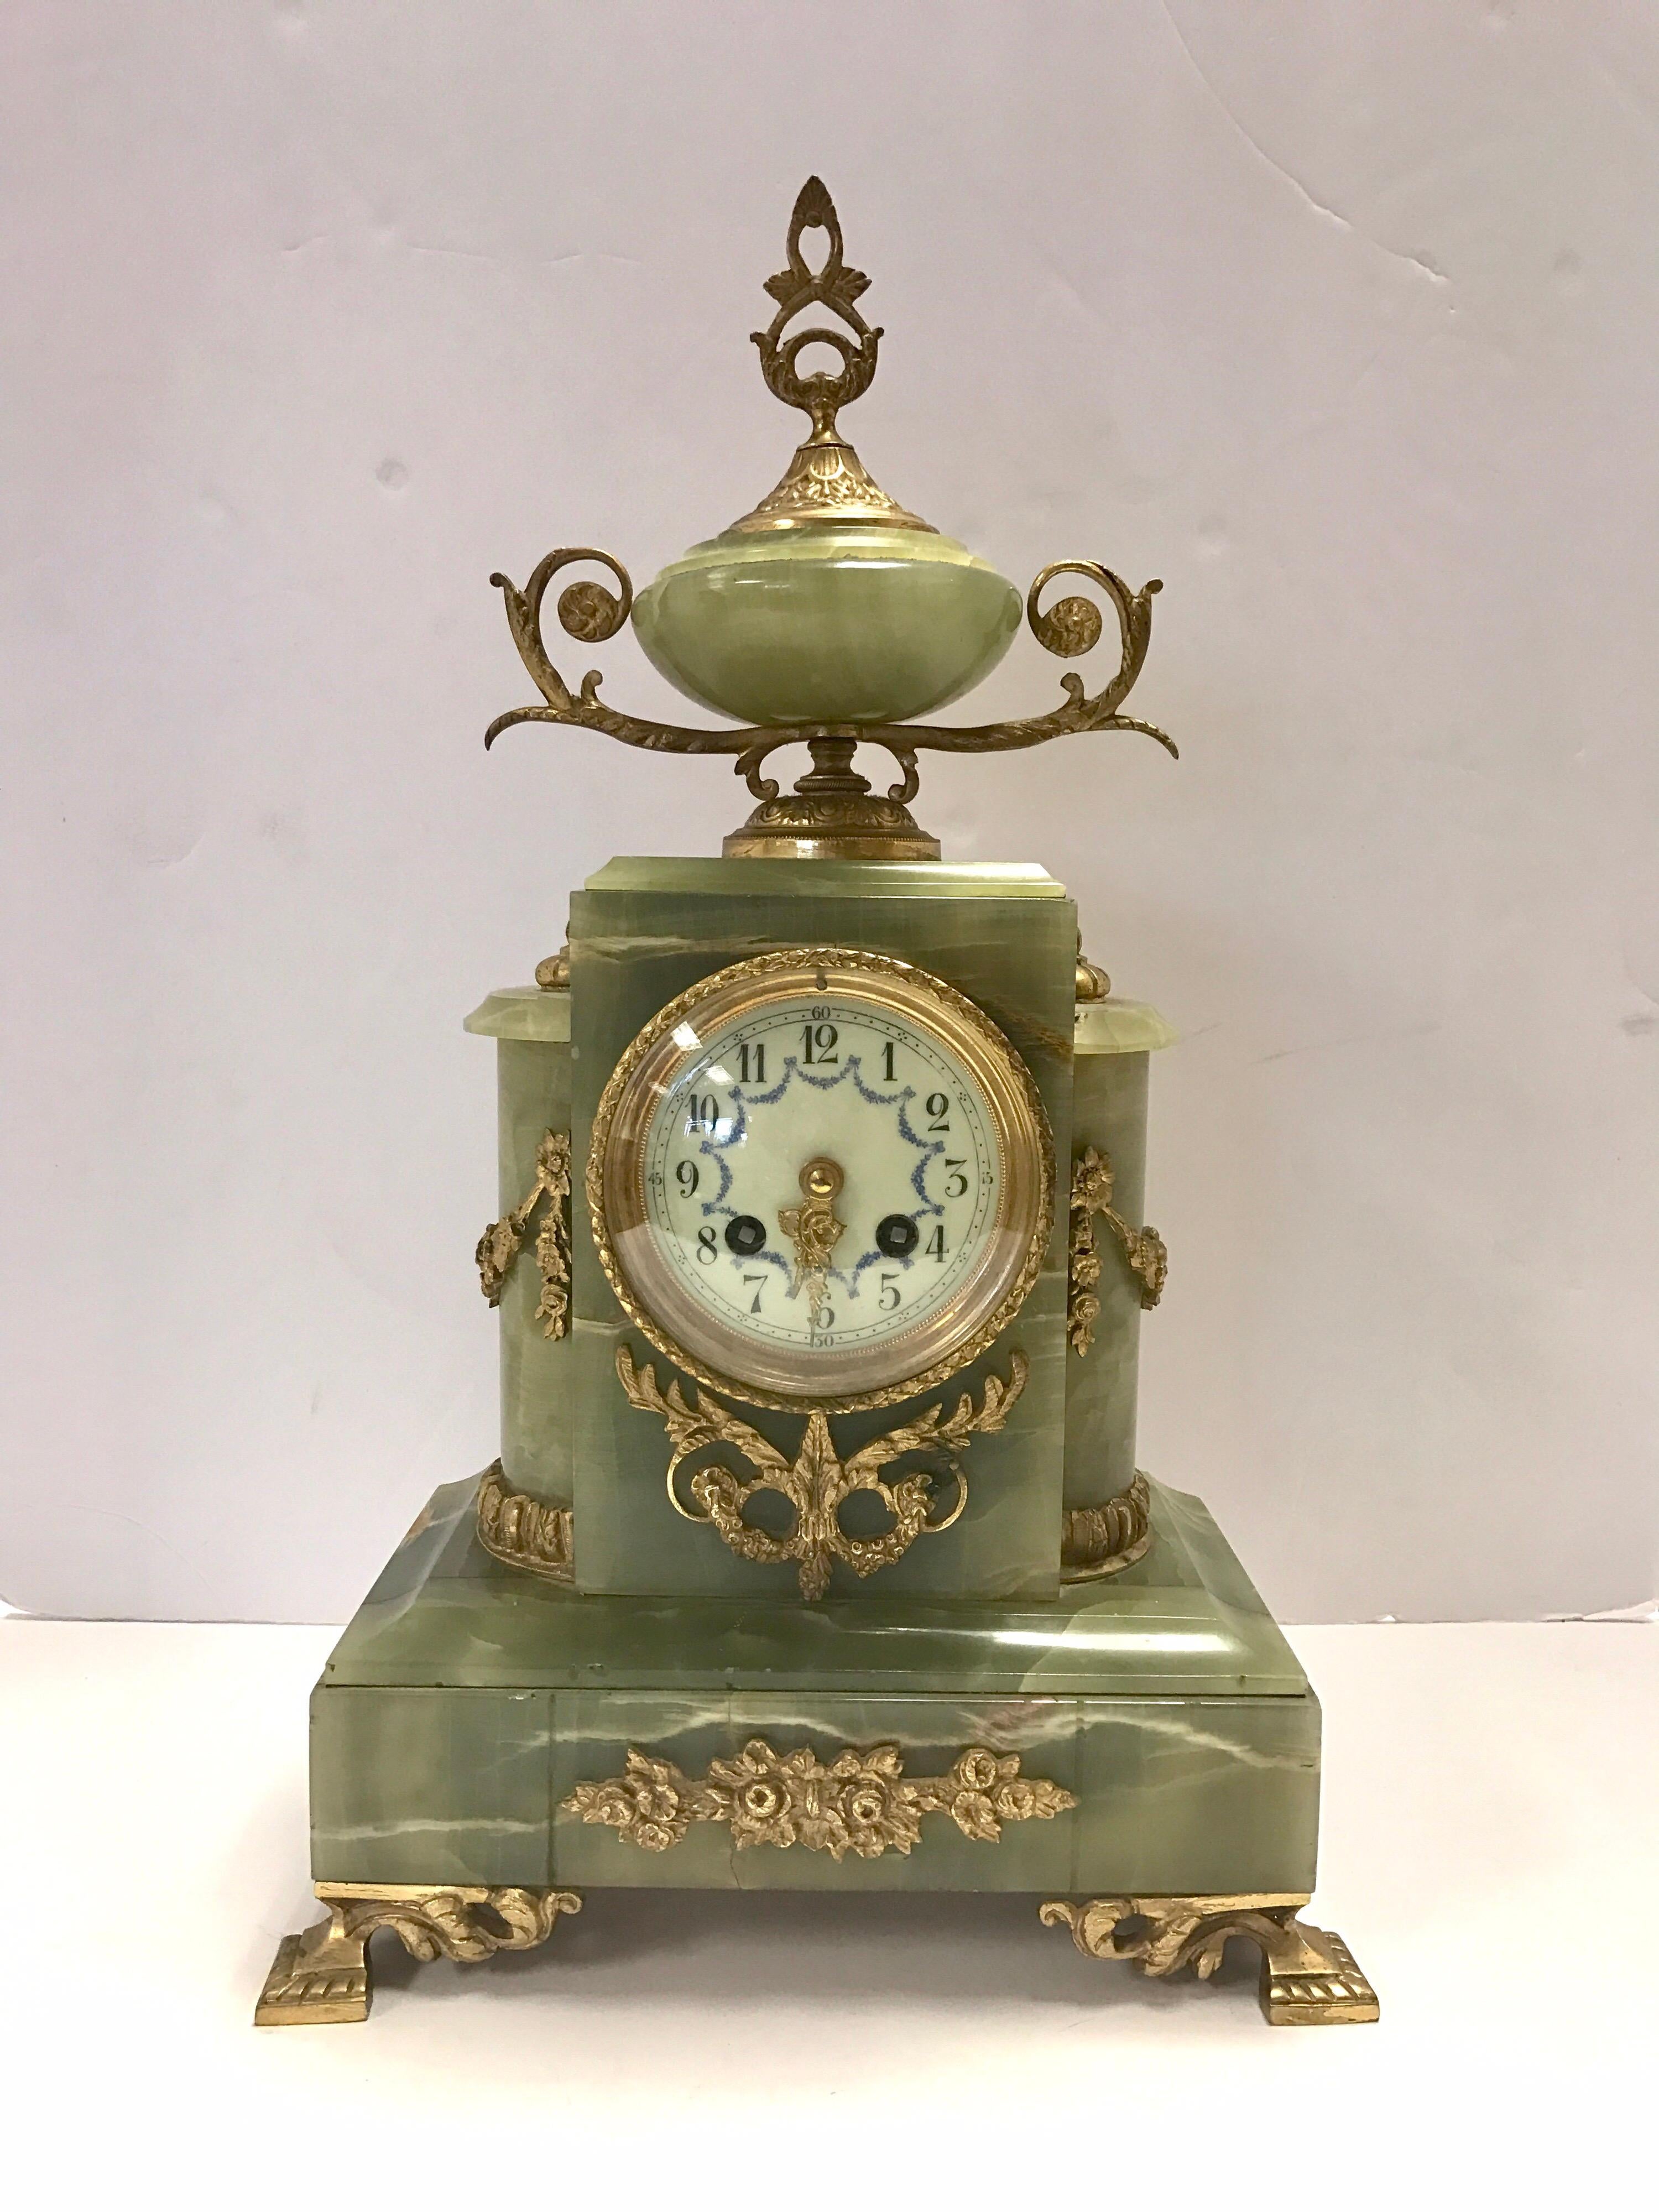 A very impressive French Louis XVI green onyx and bronze gilt ormolu clock set comprising of two four branch candelabra garnitures and a mantel clock in the Louis XVI style. The candelabras have a scrolling leaf and floral branch design. The clock